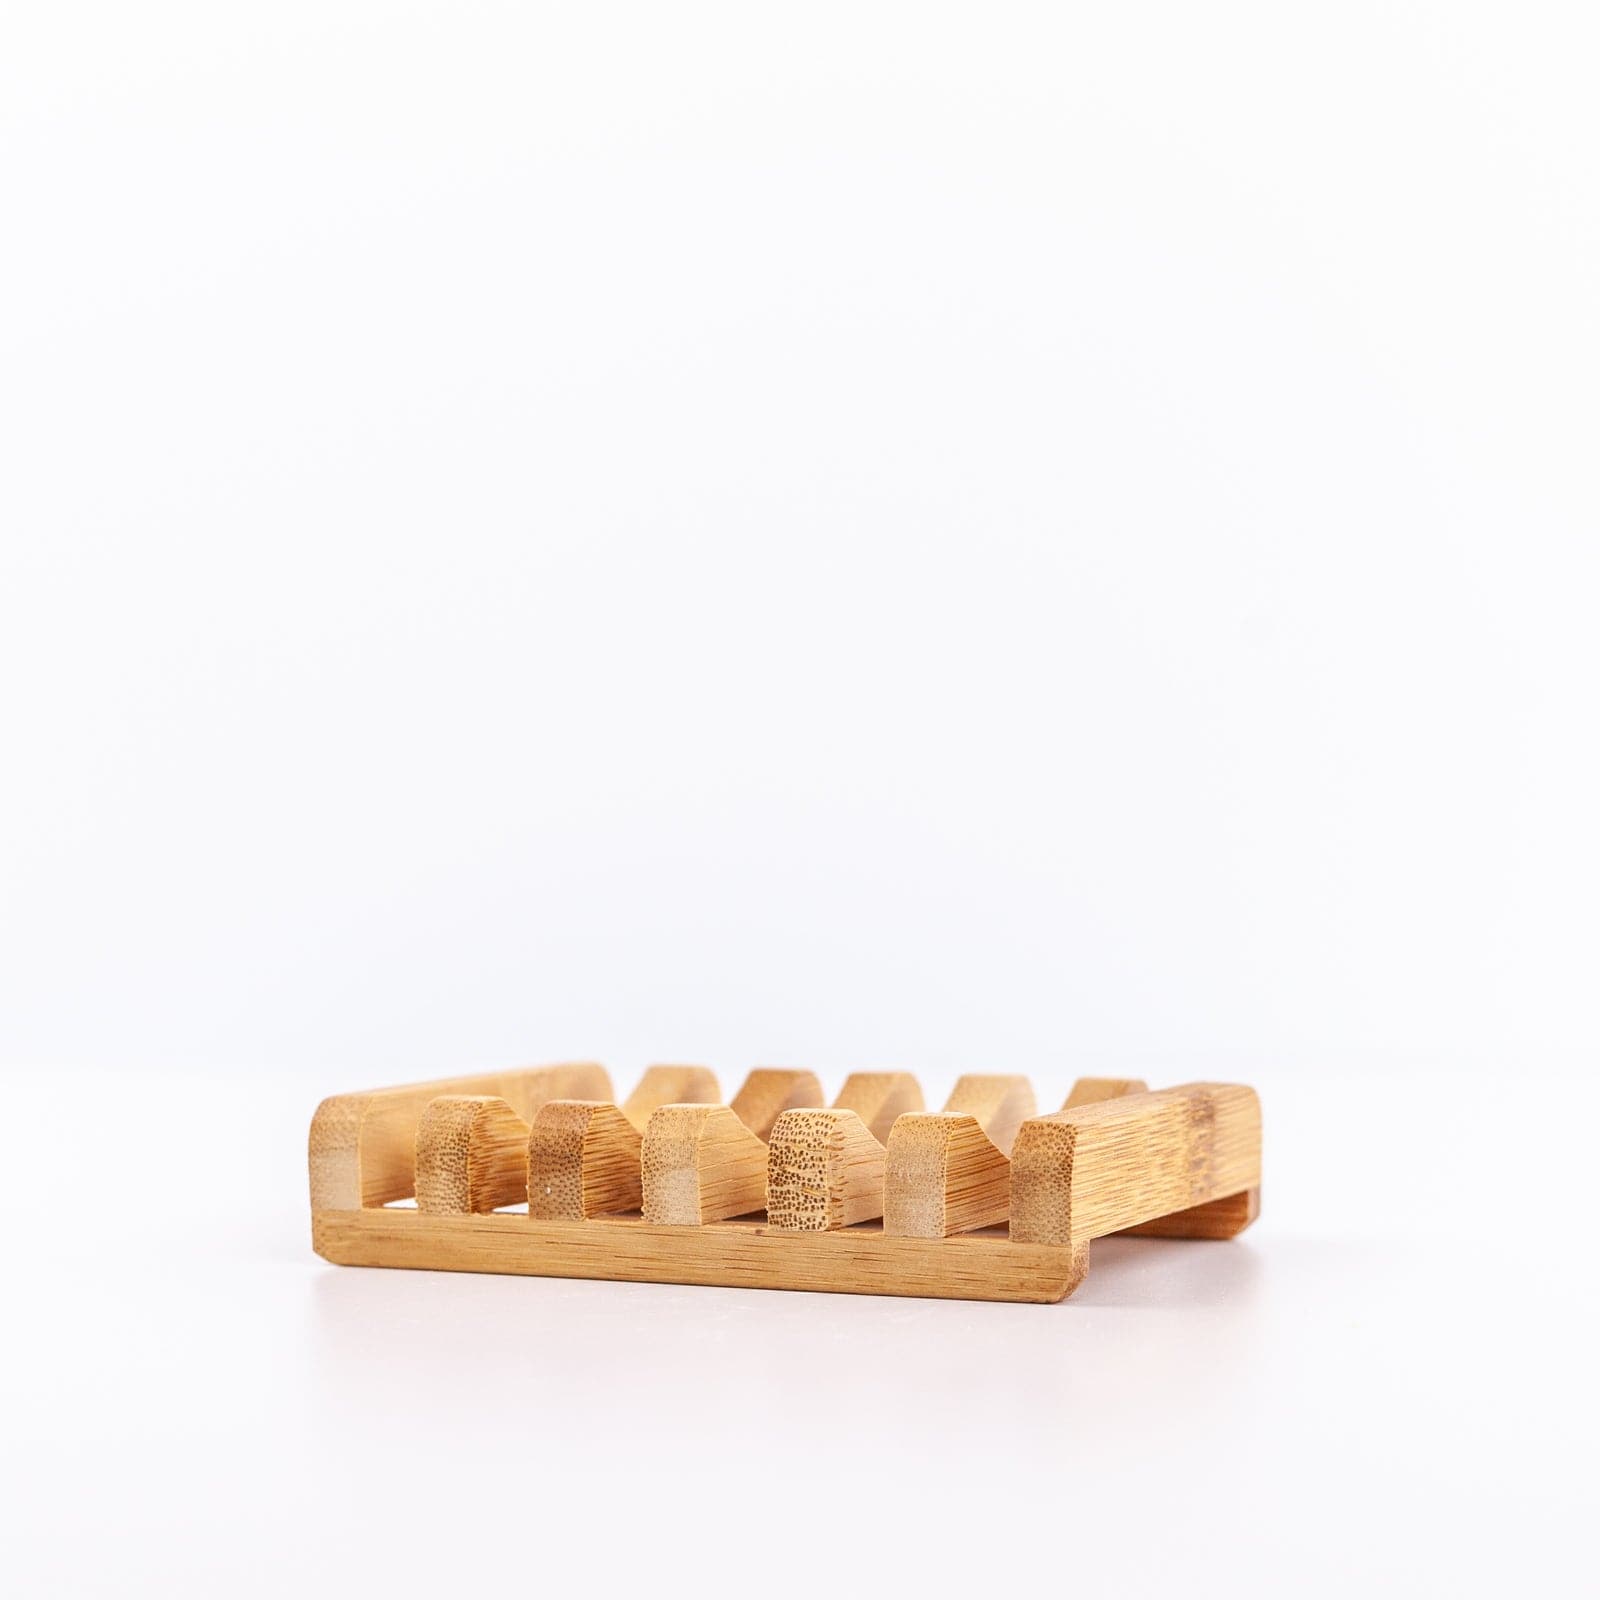 Angled view of wooden soap dish